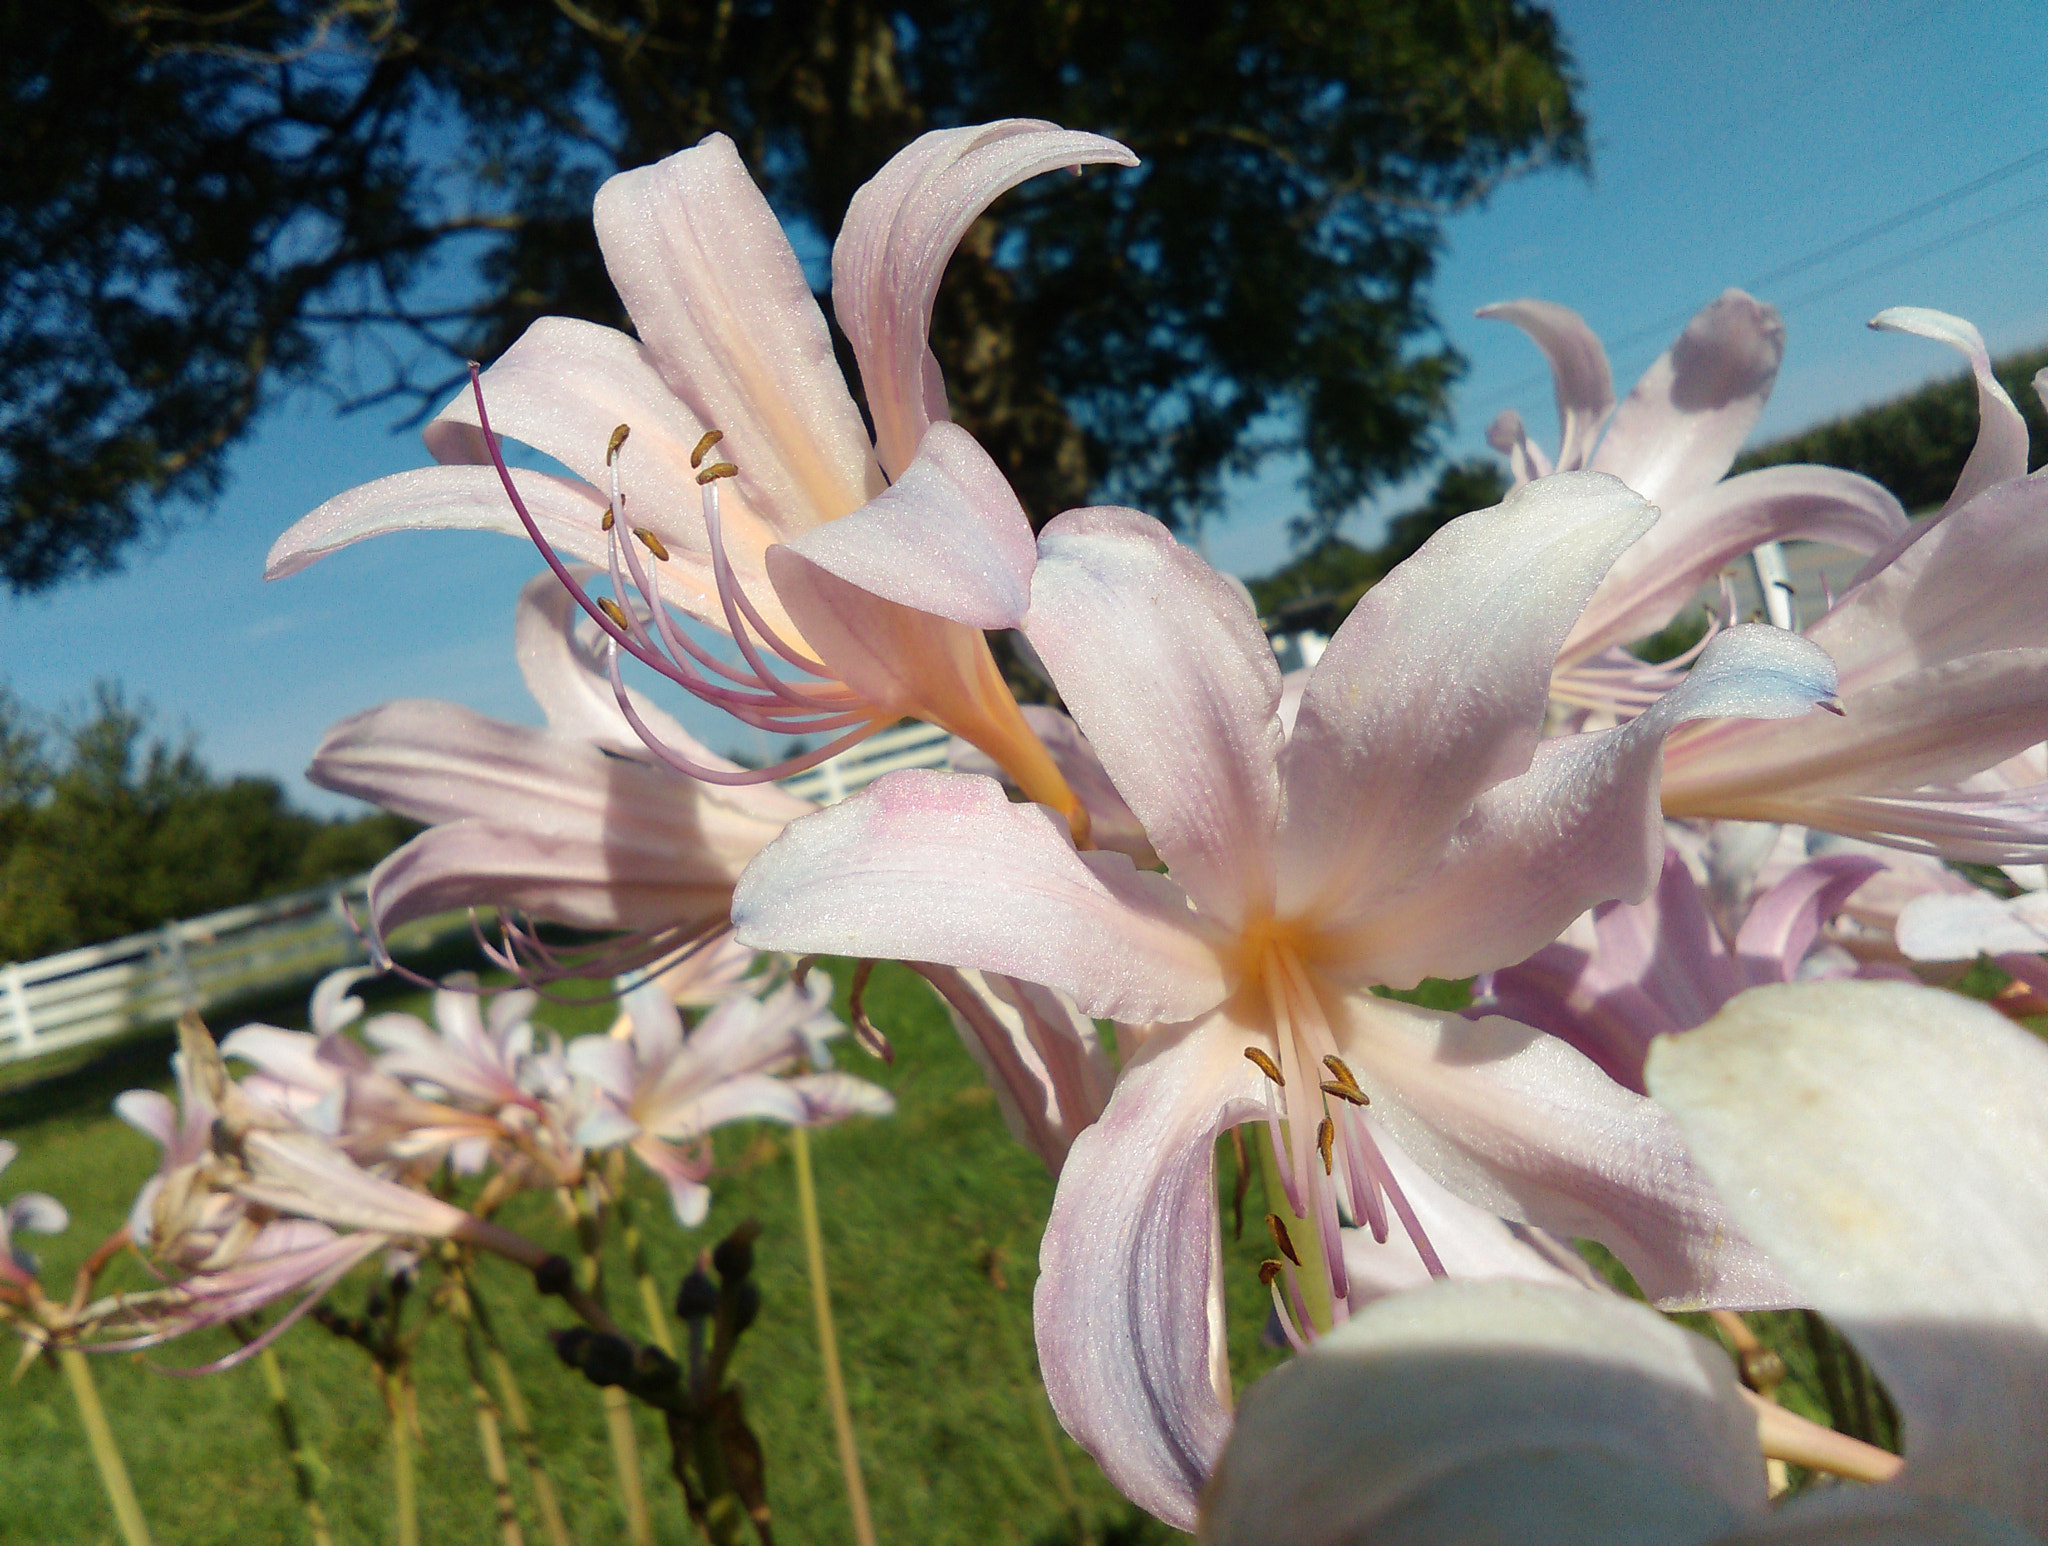 HTC DESIRE 610 sample photo. Surprise lilies welcoming spring photography